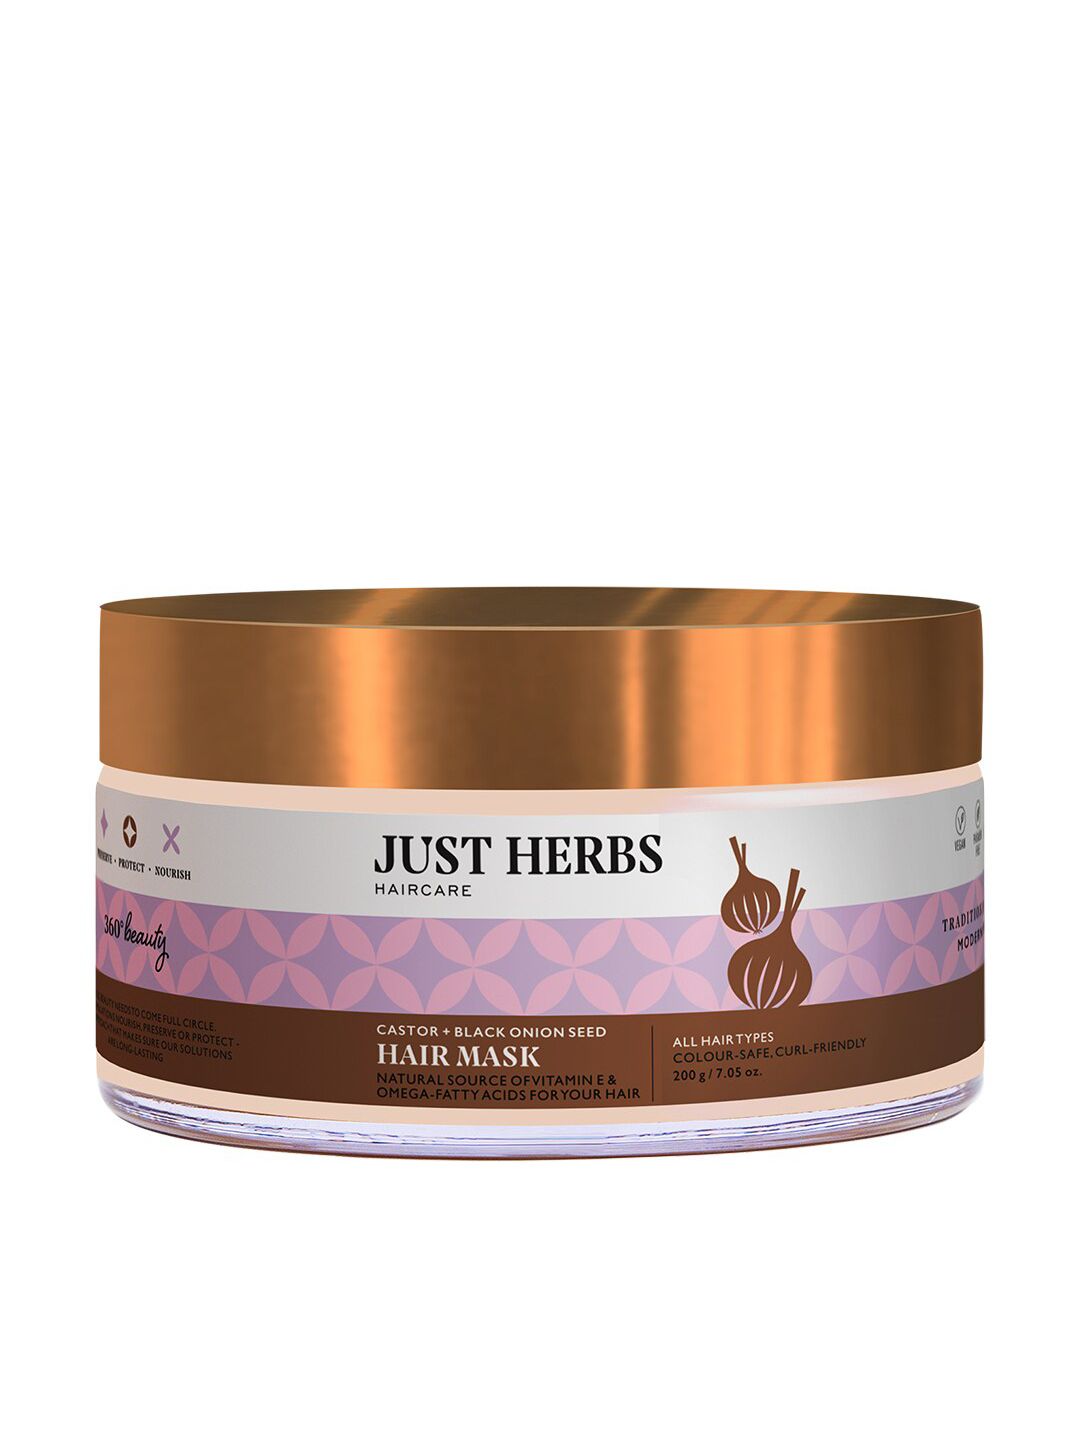 Just Herbs Castor & Black Onion Seed Hair Mask - 200 g Price in India